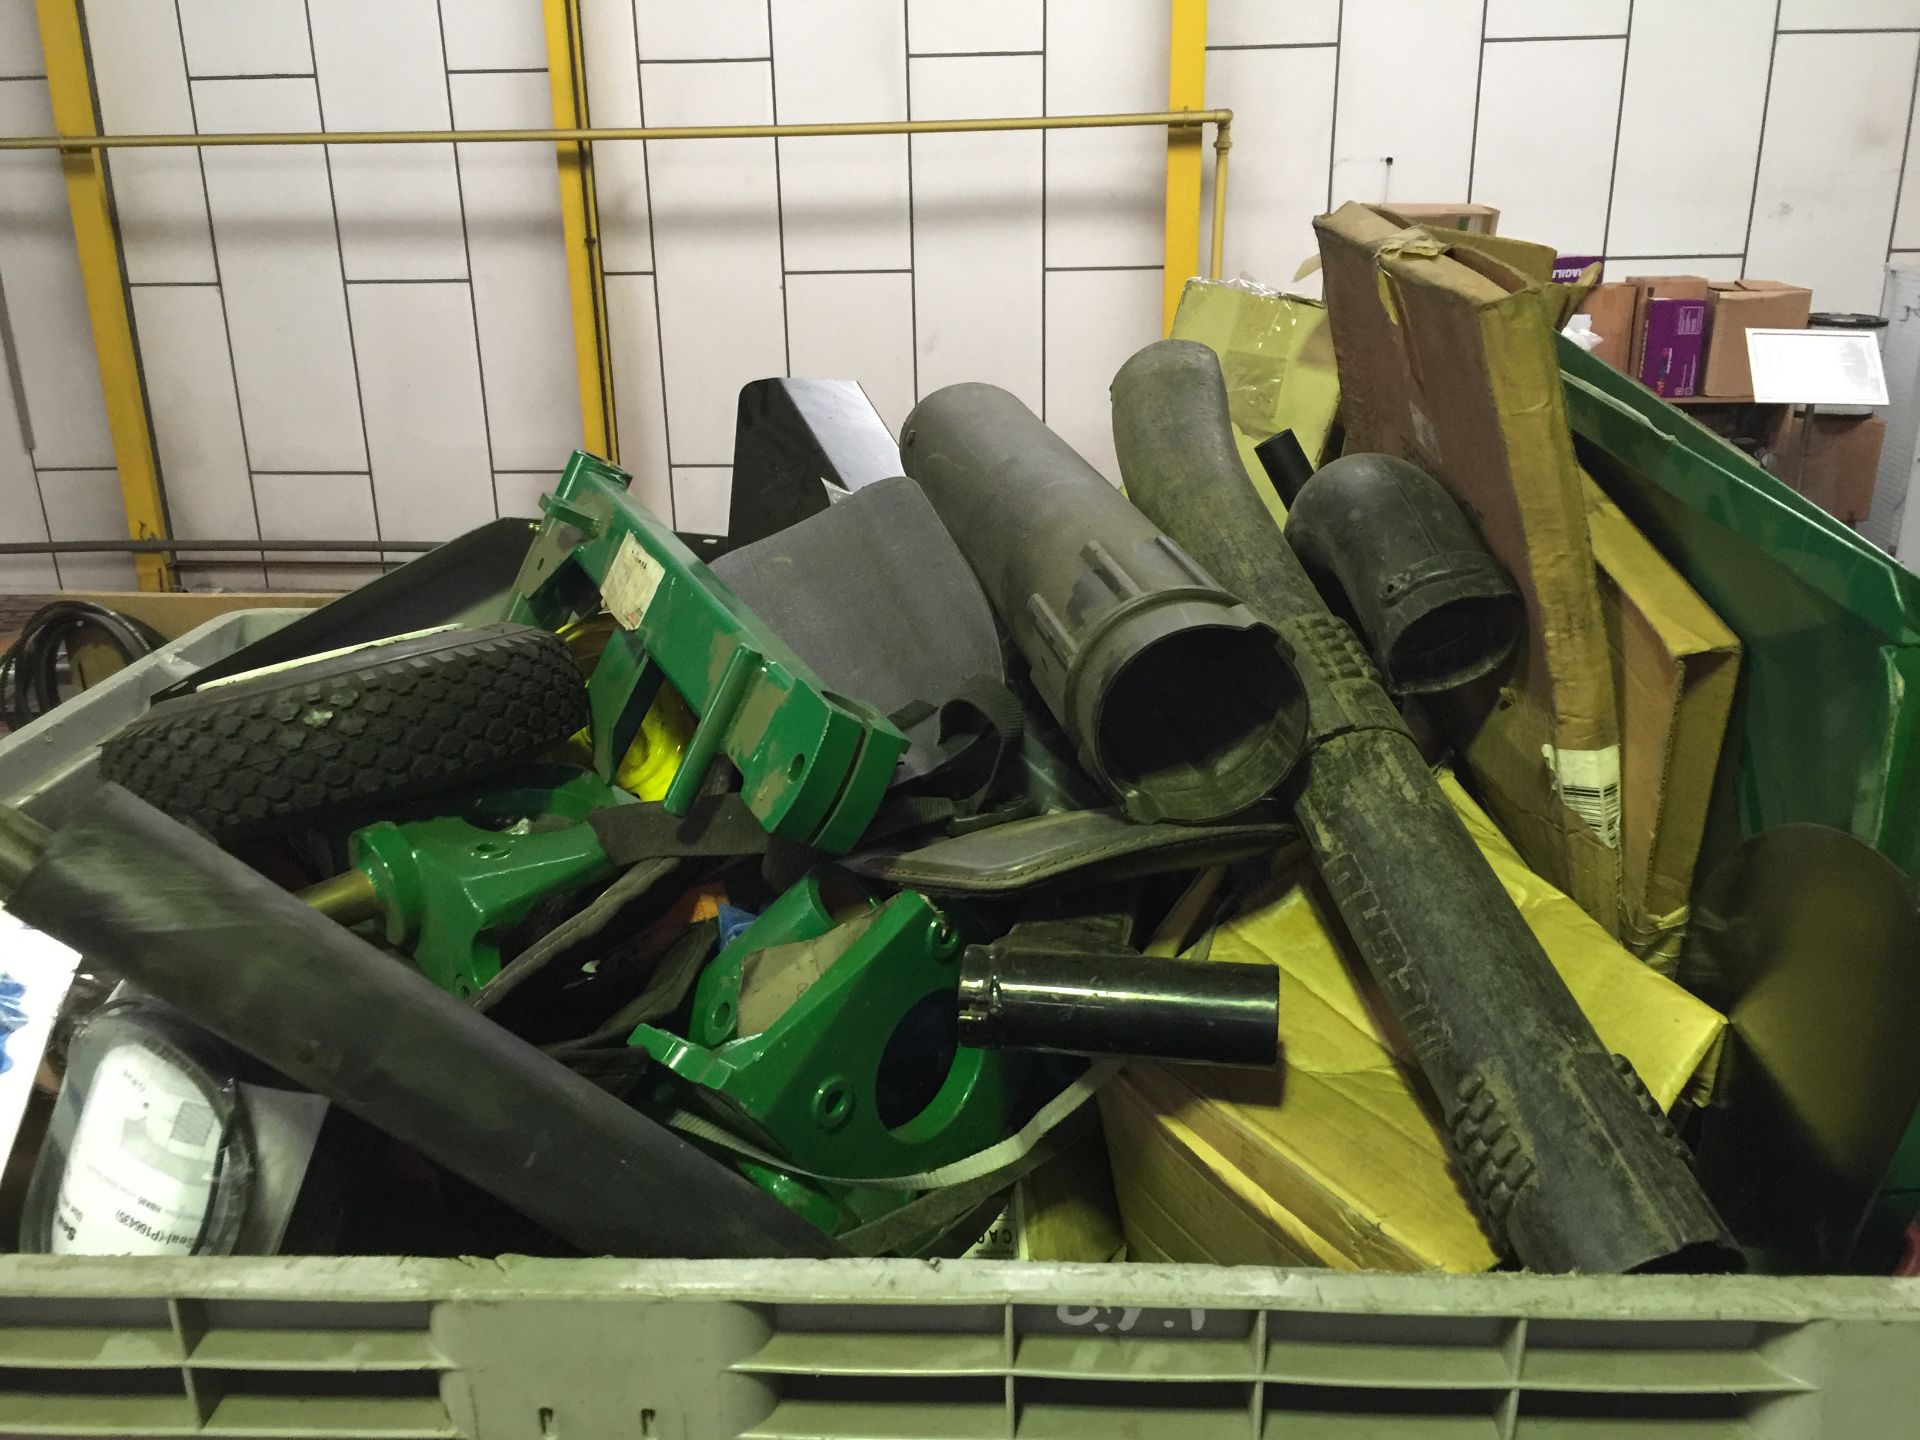 Quantity of spares including fan belts, spare tyres, filters, etc, as indicated, 3 stillages 2 mobil - Bild 2 aus 11